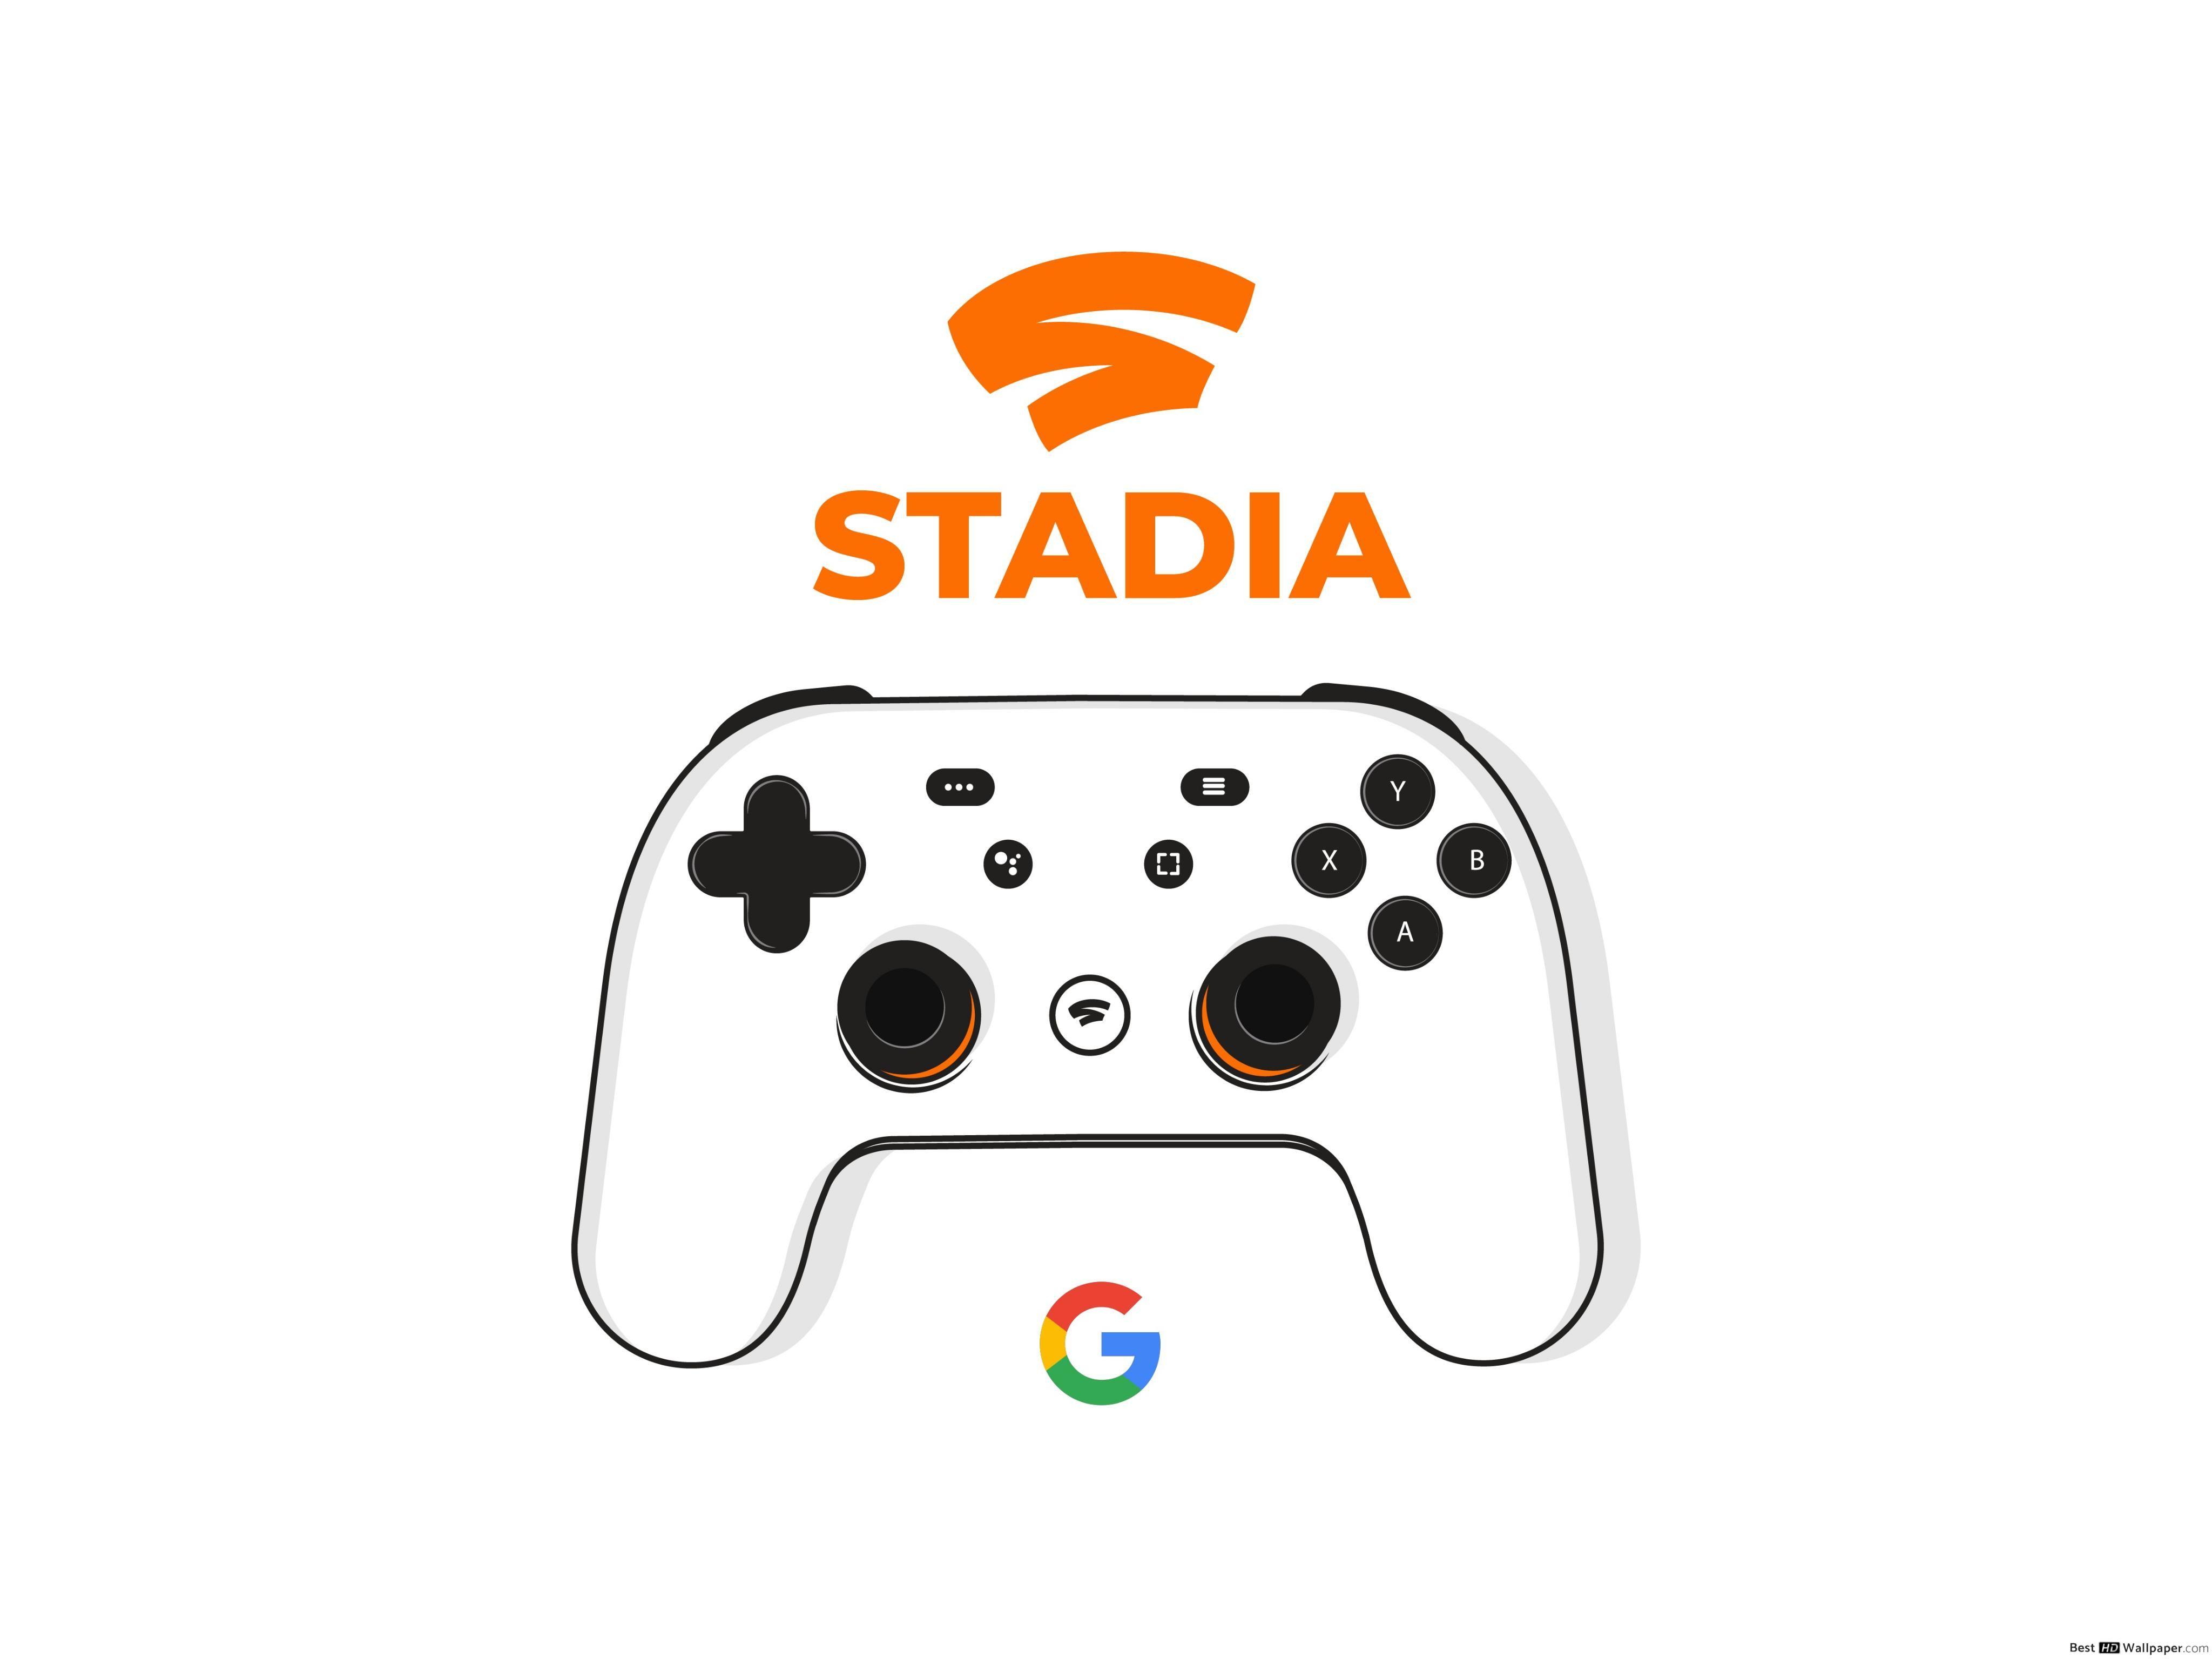 Stadians, where can I find this Cyberpunk Stadia wallpaper in high  resolution? Where can I find more Stadia wallpapers like the other ones?  Thank you. I created a Google Photos album for